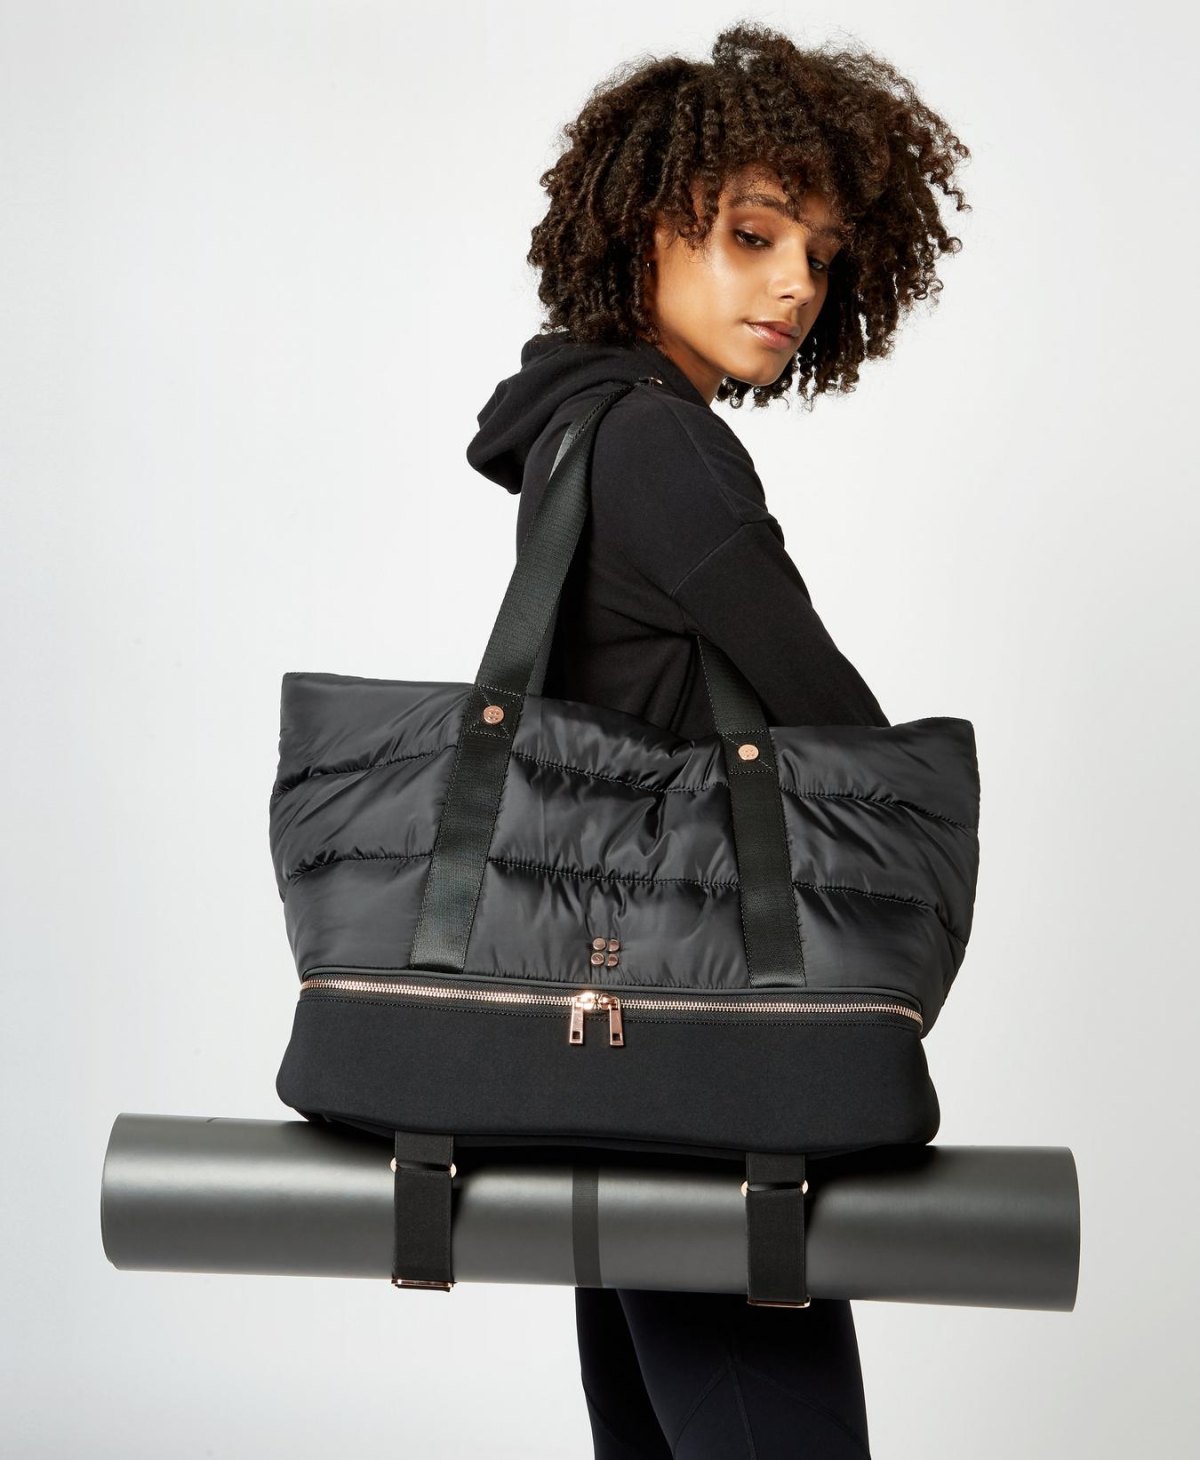 From an Under Armour backpack to a Sweaty Betty tote, 5 gym bags to  complete your workout look